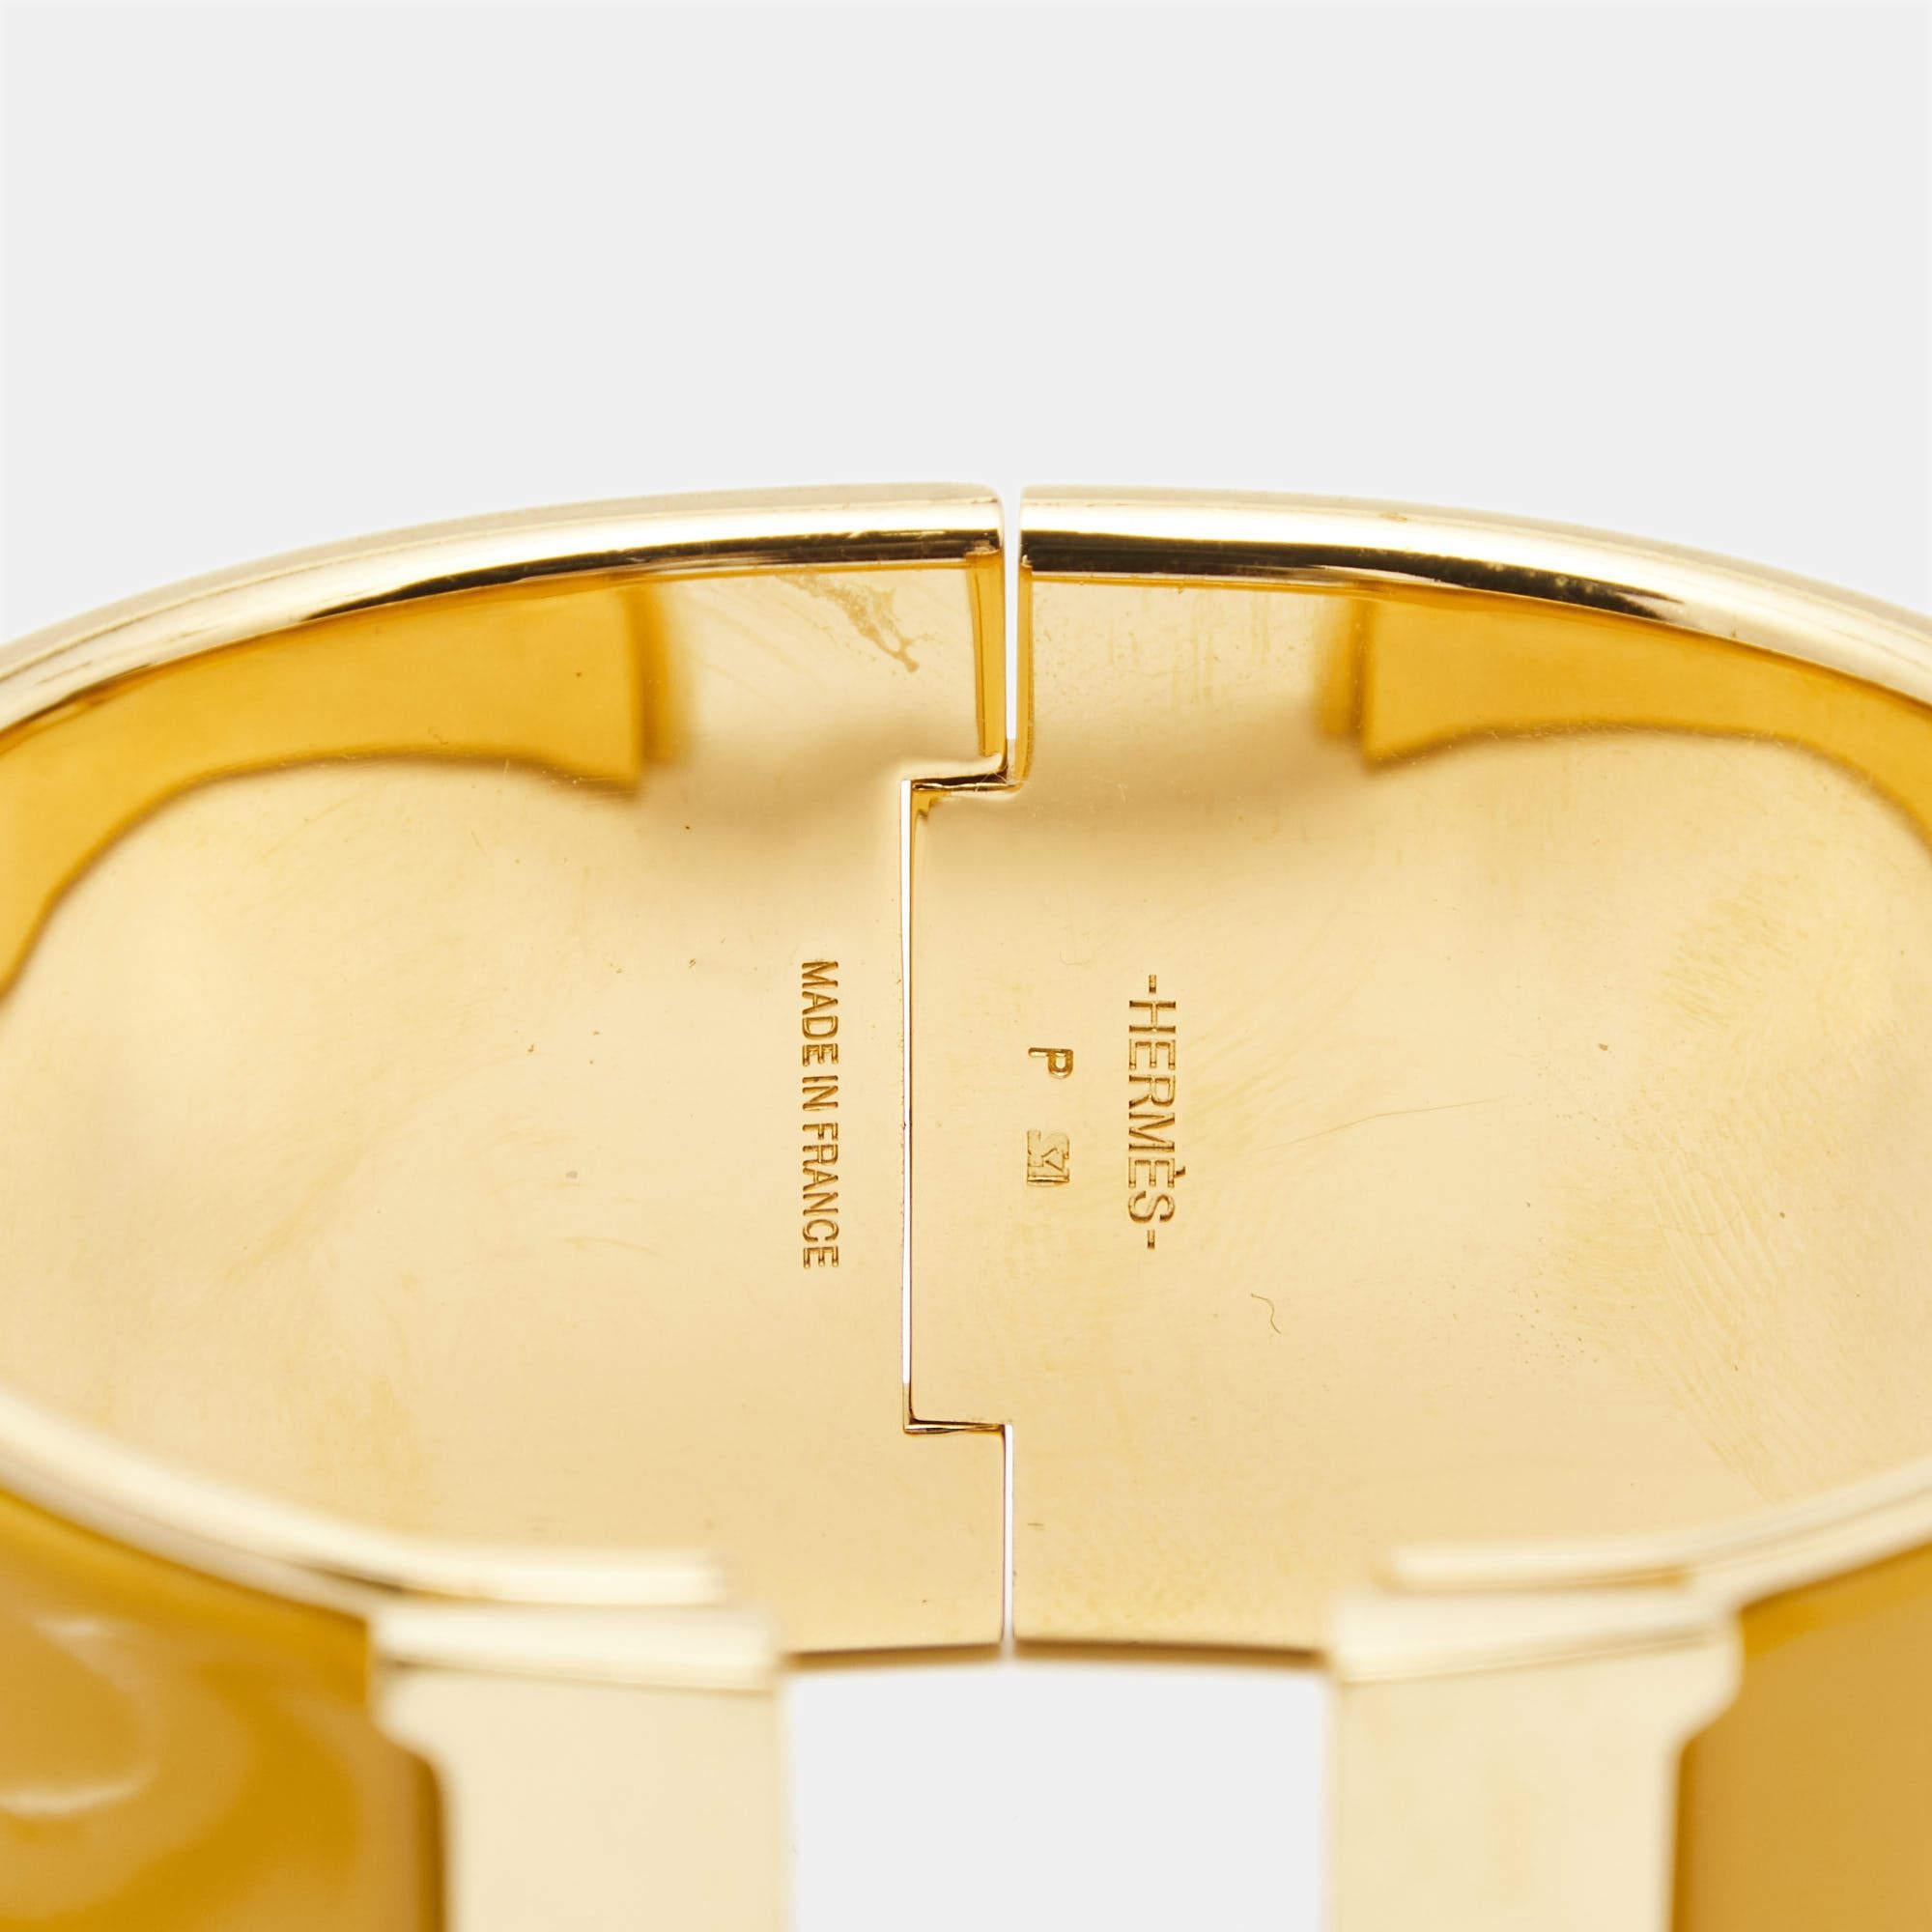 Ultra-modern and chic in design, this Hermes bracelet exhibits contemporary fashion. The luxe design is set with distinct elements to give the creation a classy touch. This sweet piece will look great when paired with other bracelets and even solo.

